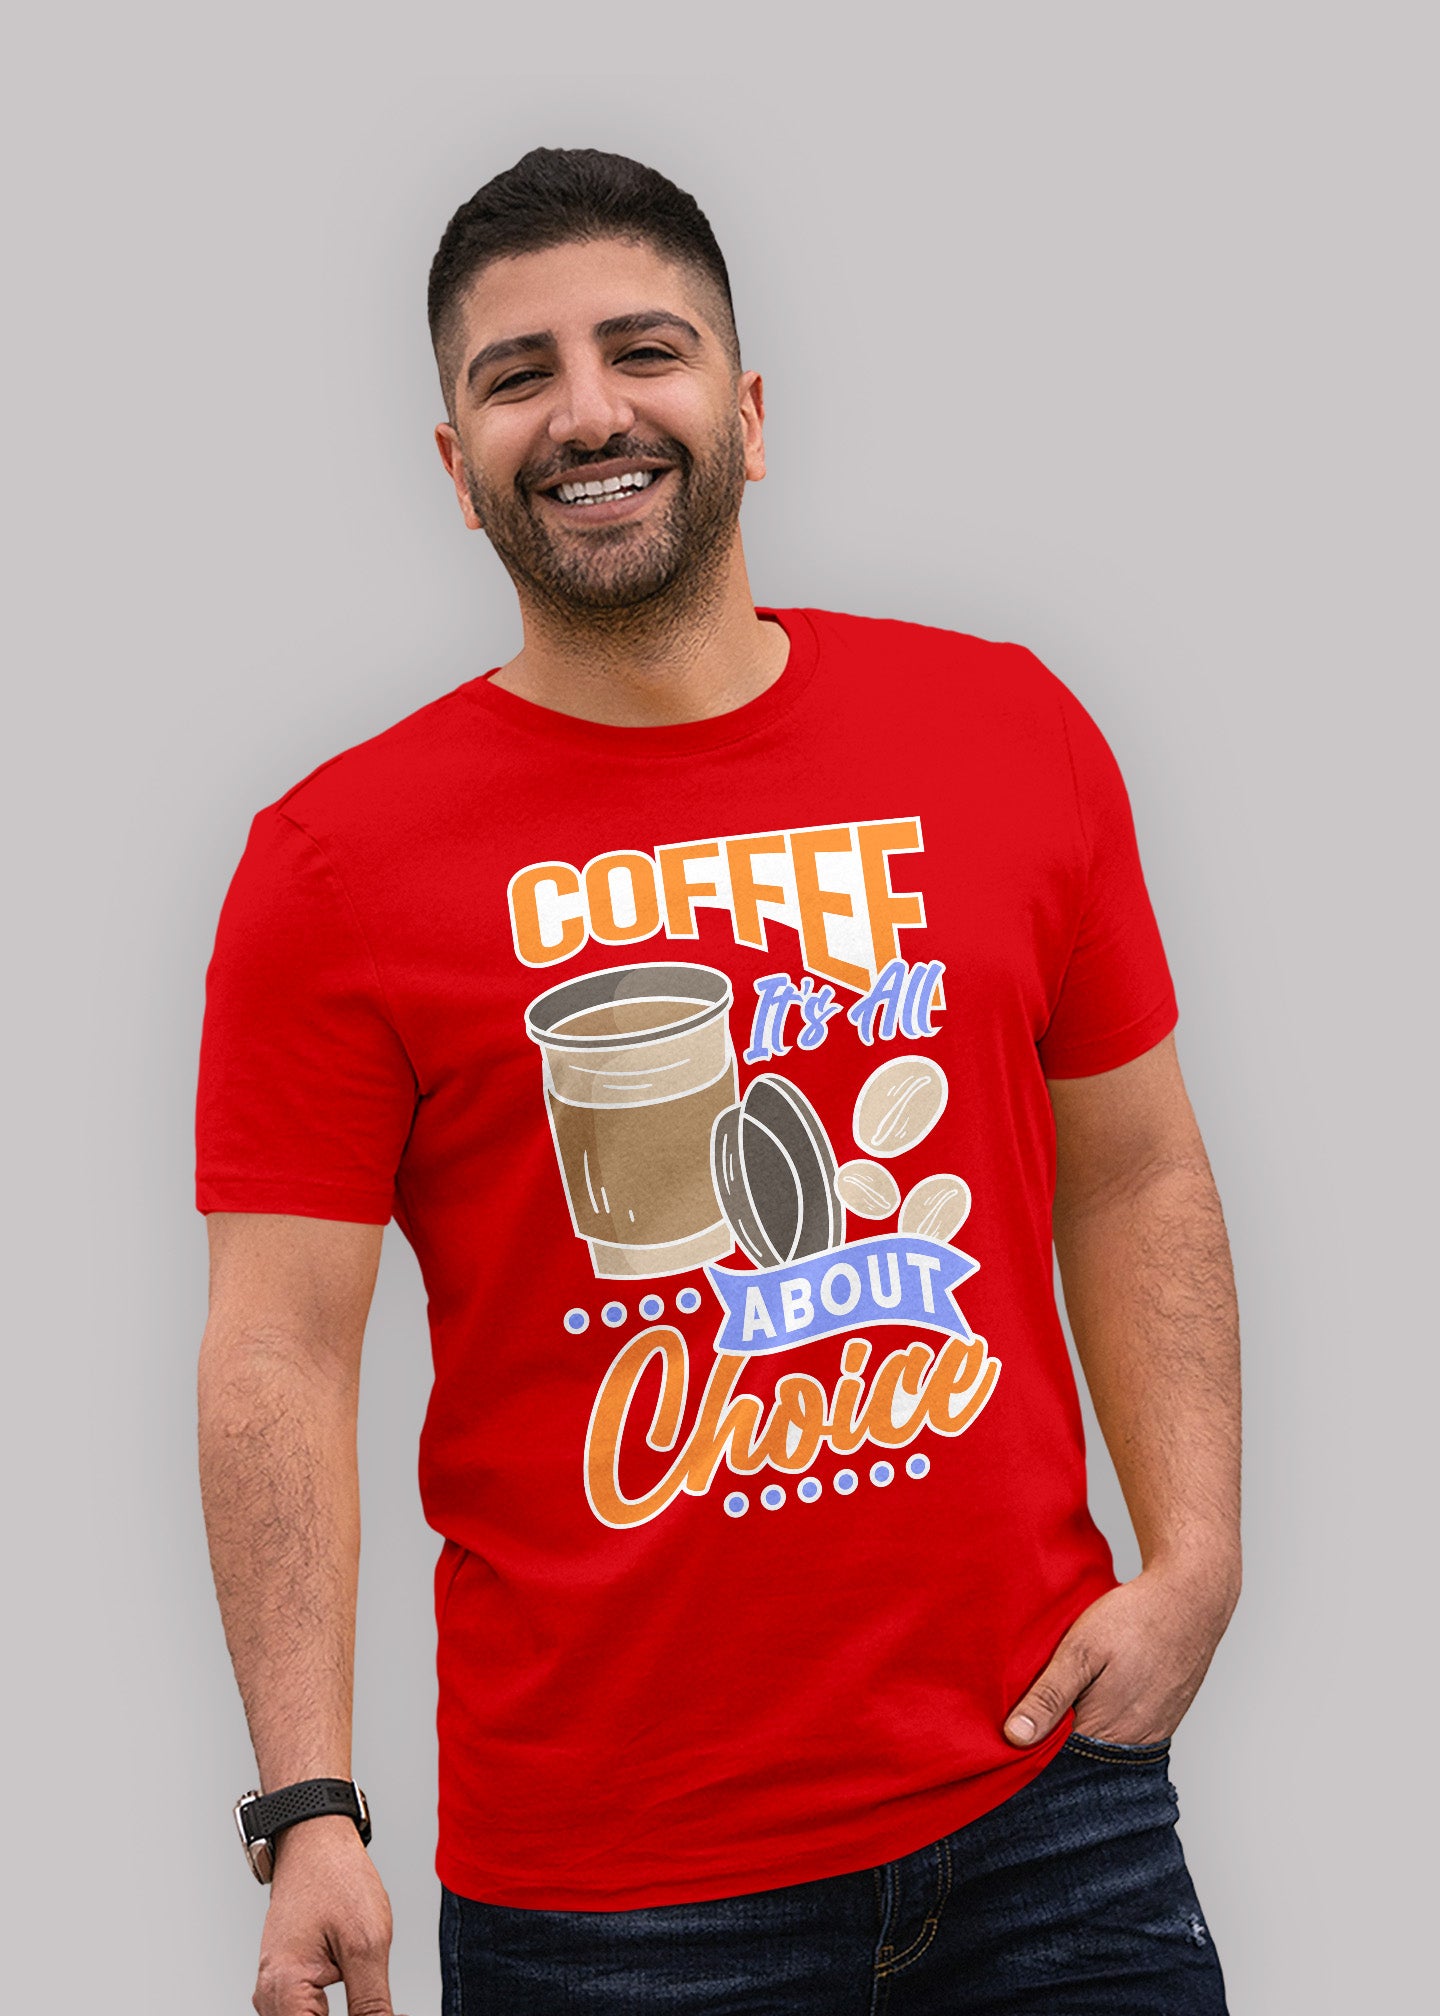 Coffee its all about choice Printed Half Sleeve Premium Cotton T-shirt For Men